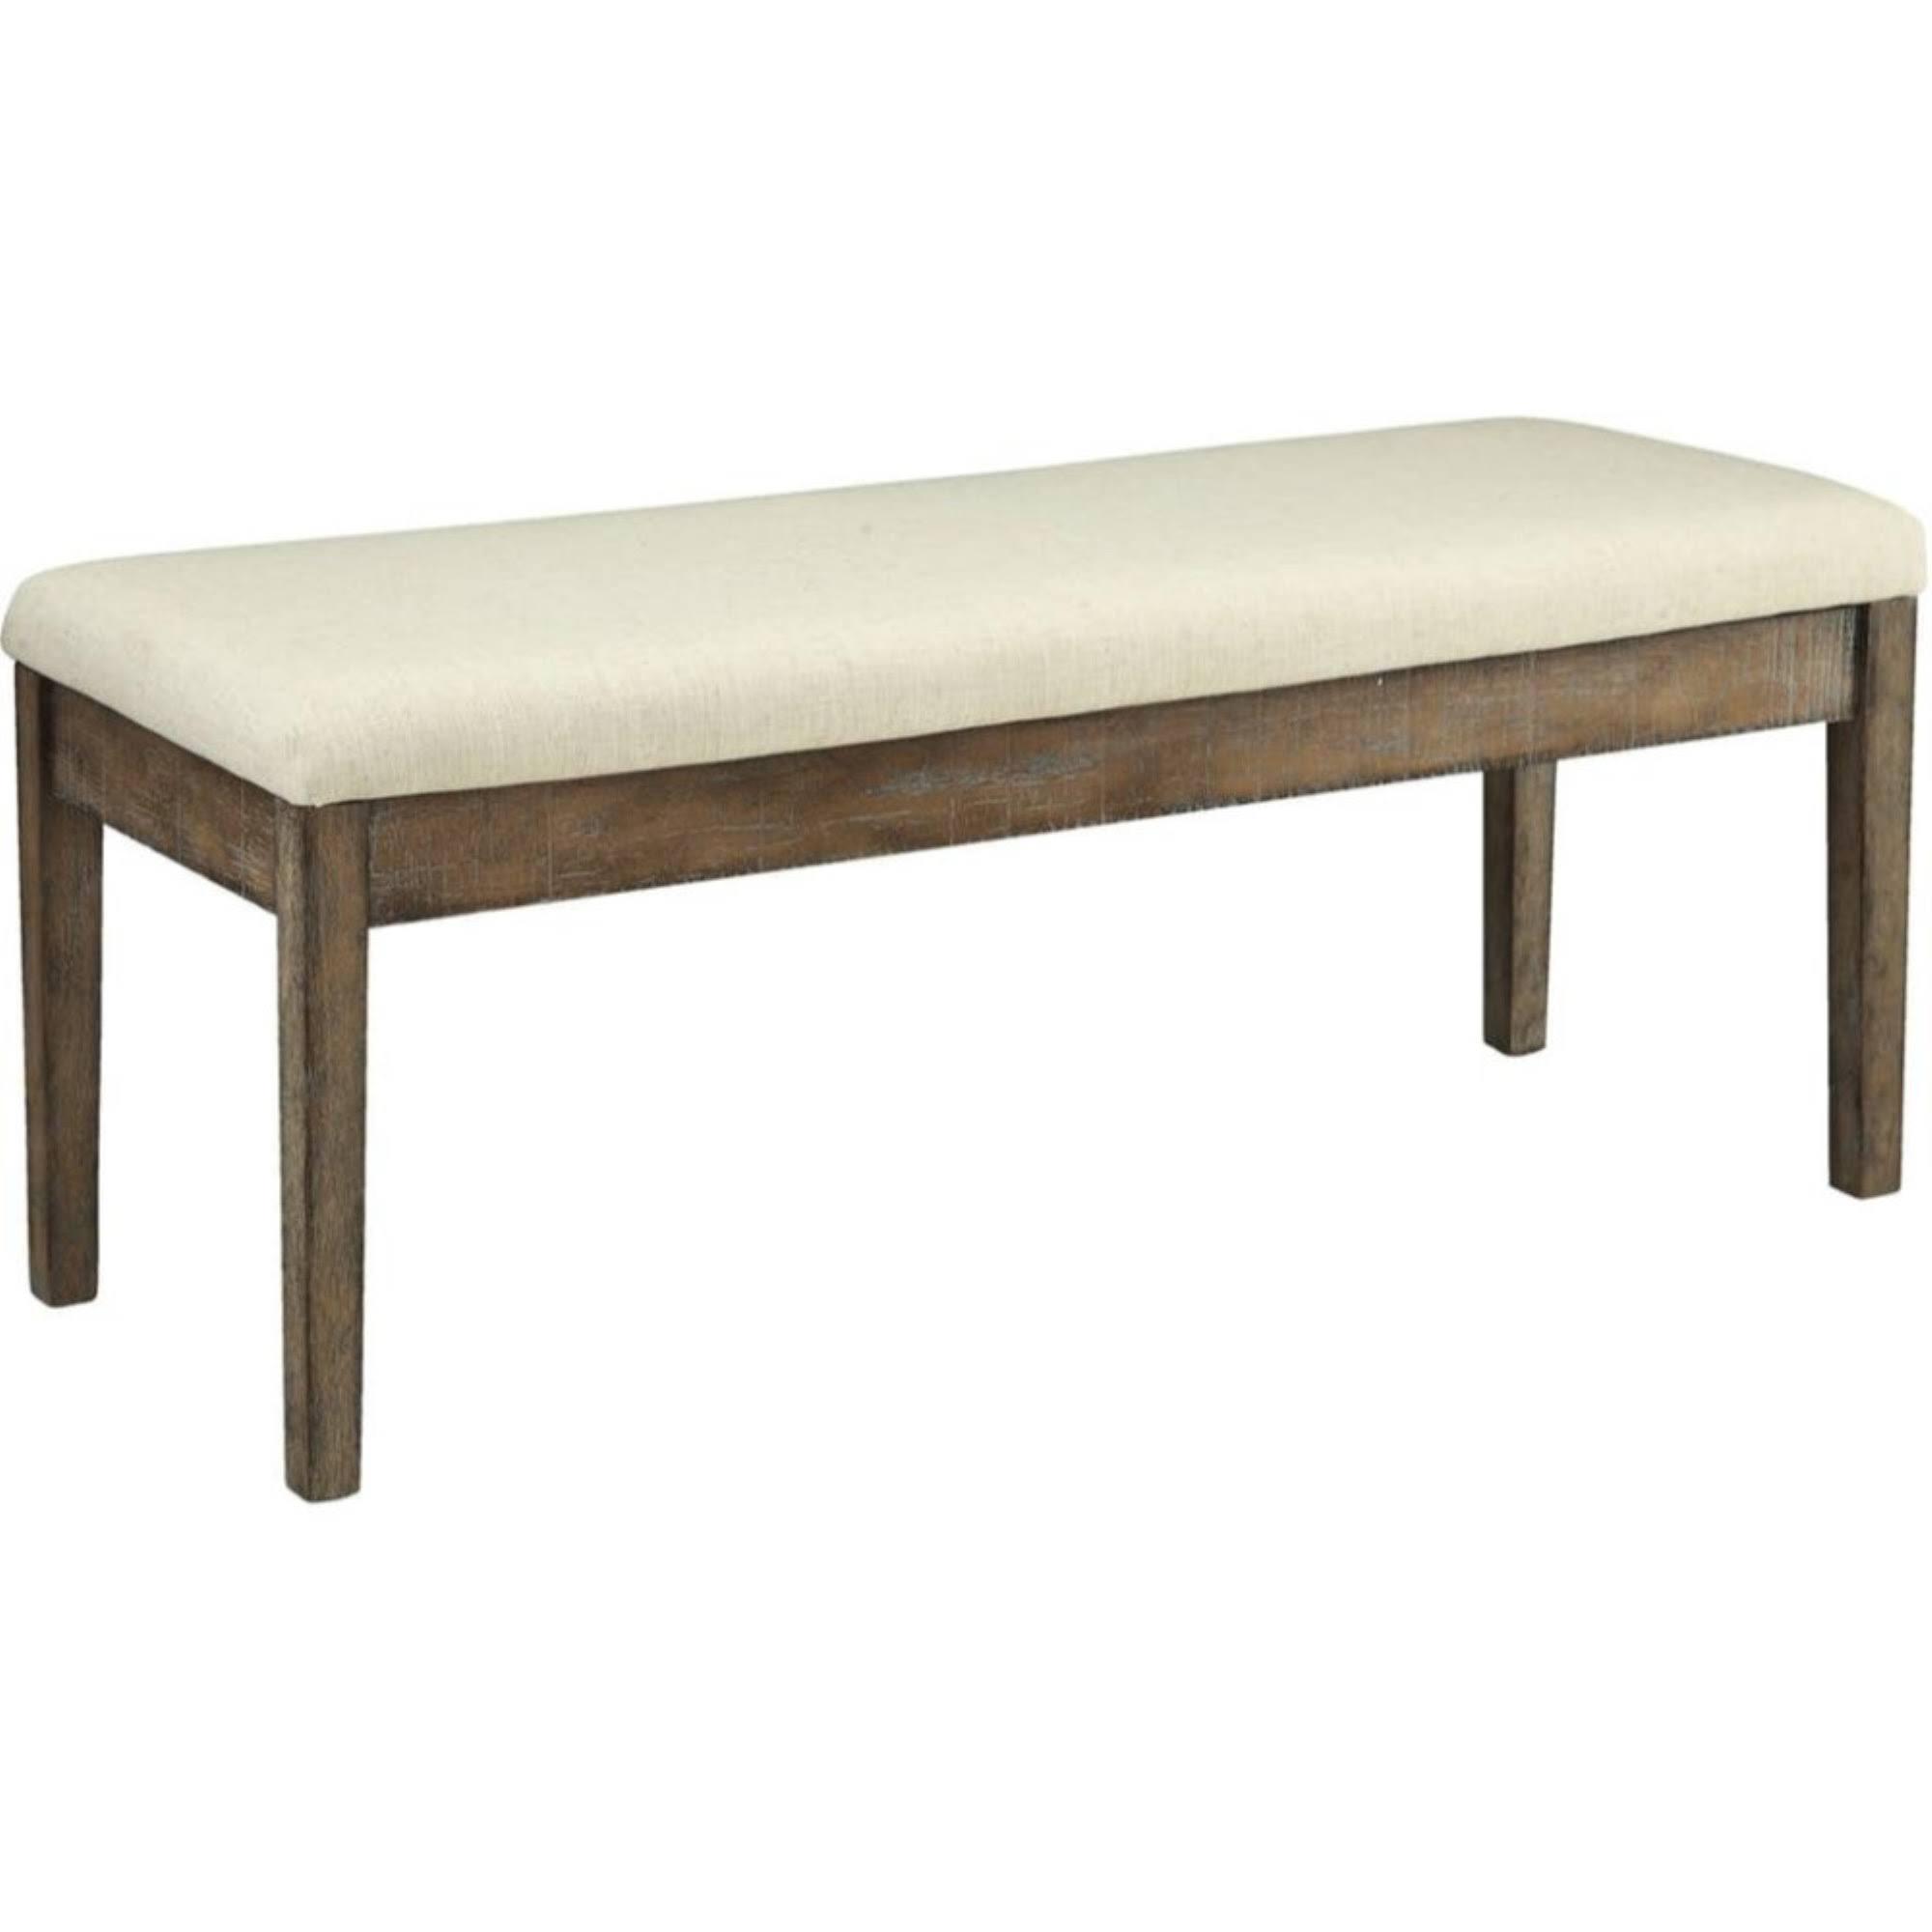 Classic, Rustic Dining Bench Claudia 71718 in Light Brown 